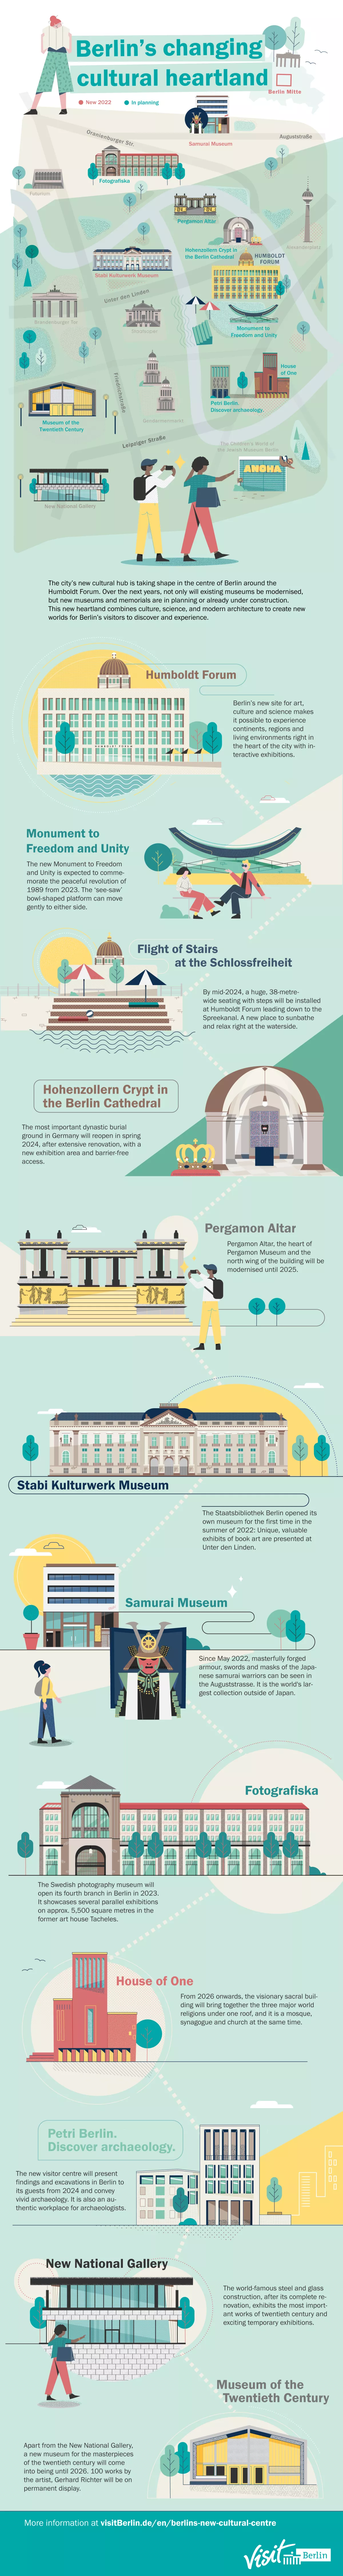 Infographics "Berlin's changing cultural heartland" 2022